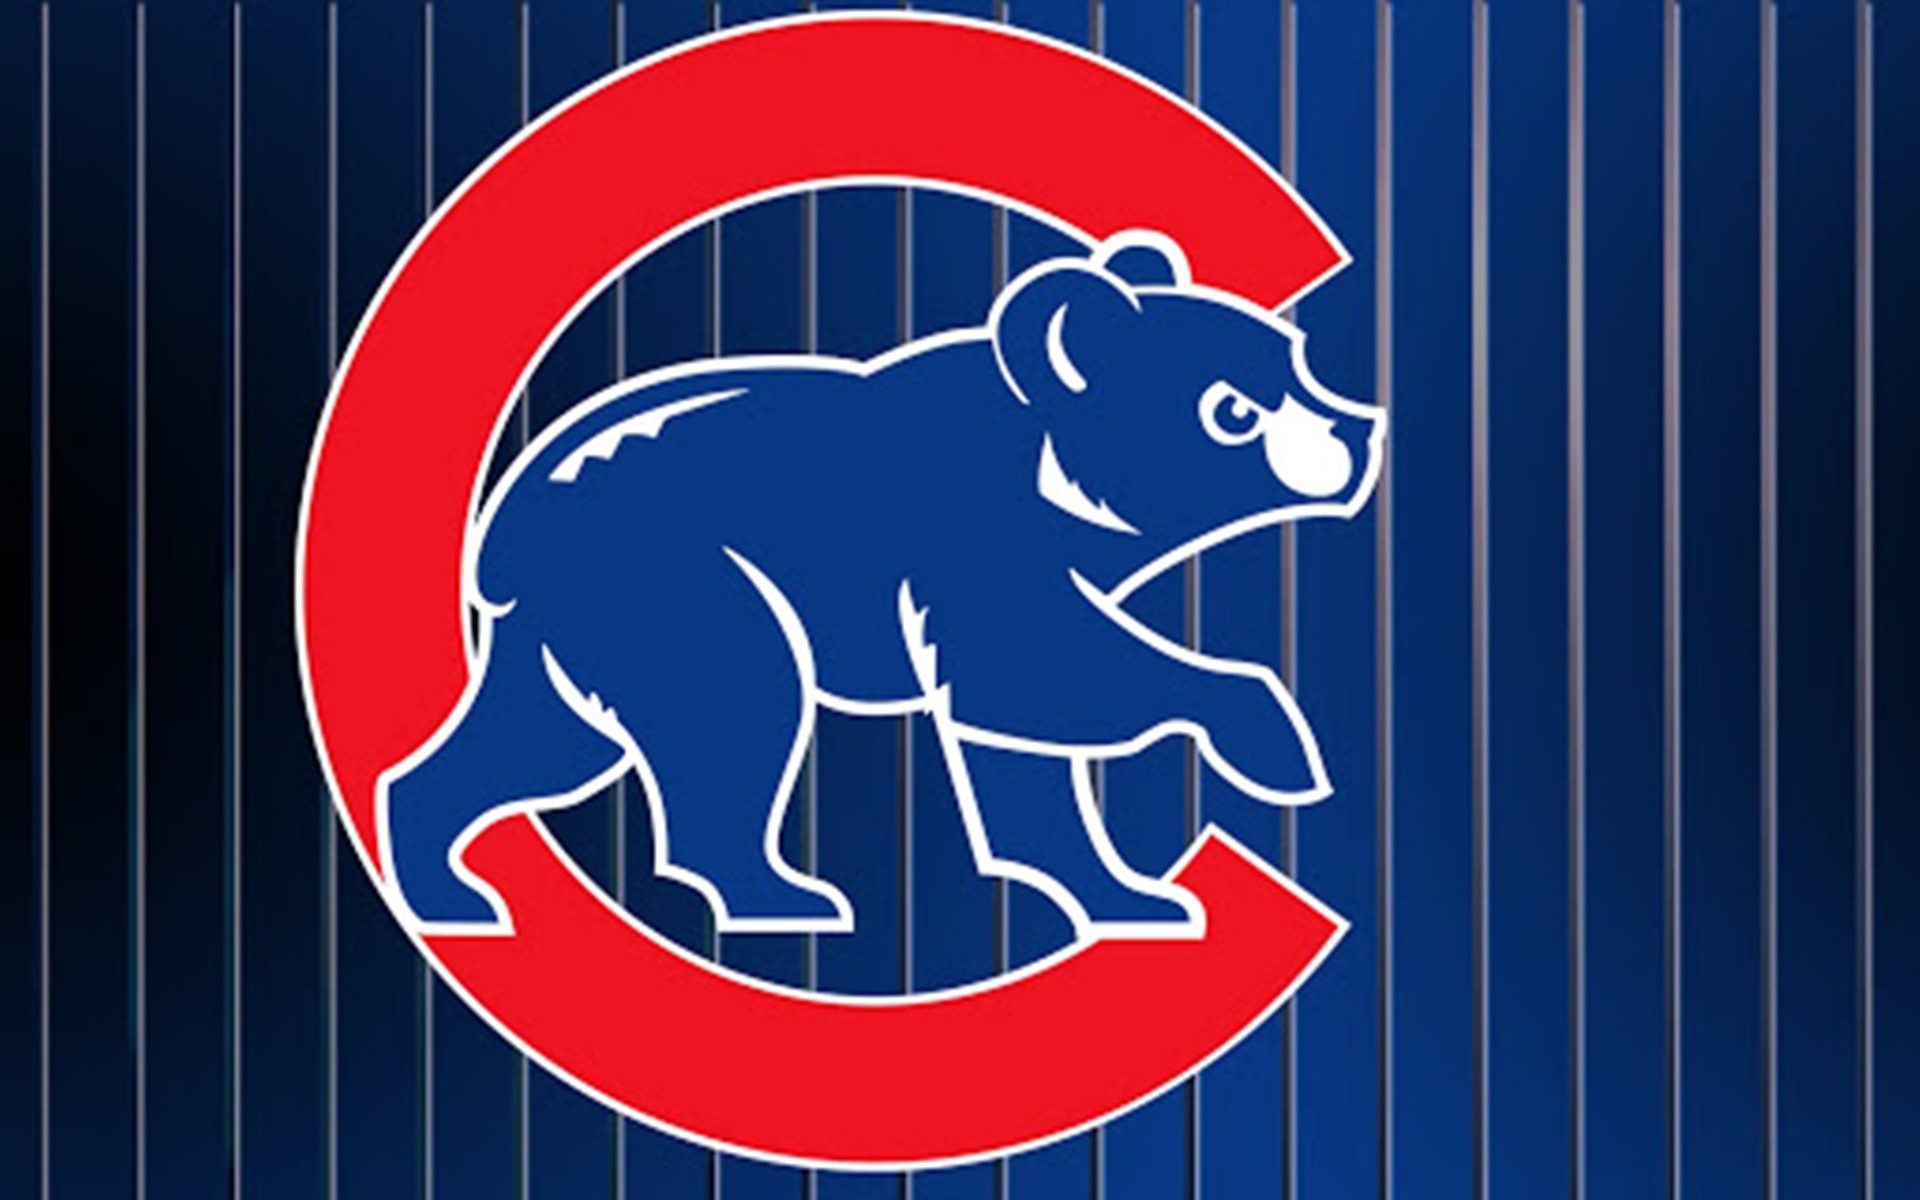 1920x1200 wallpaper details file name chicago cubs wallpaper uploaded by scherma .